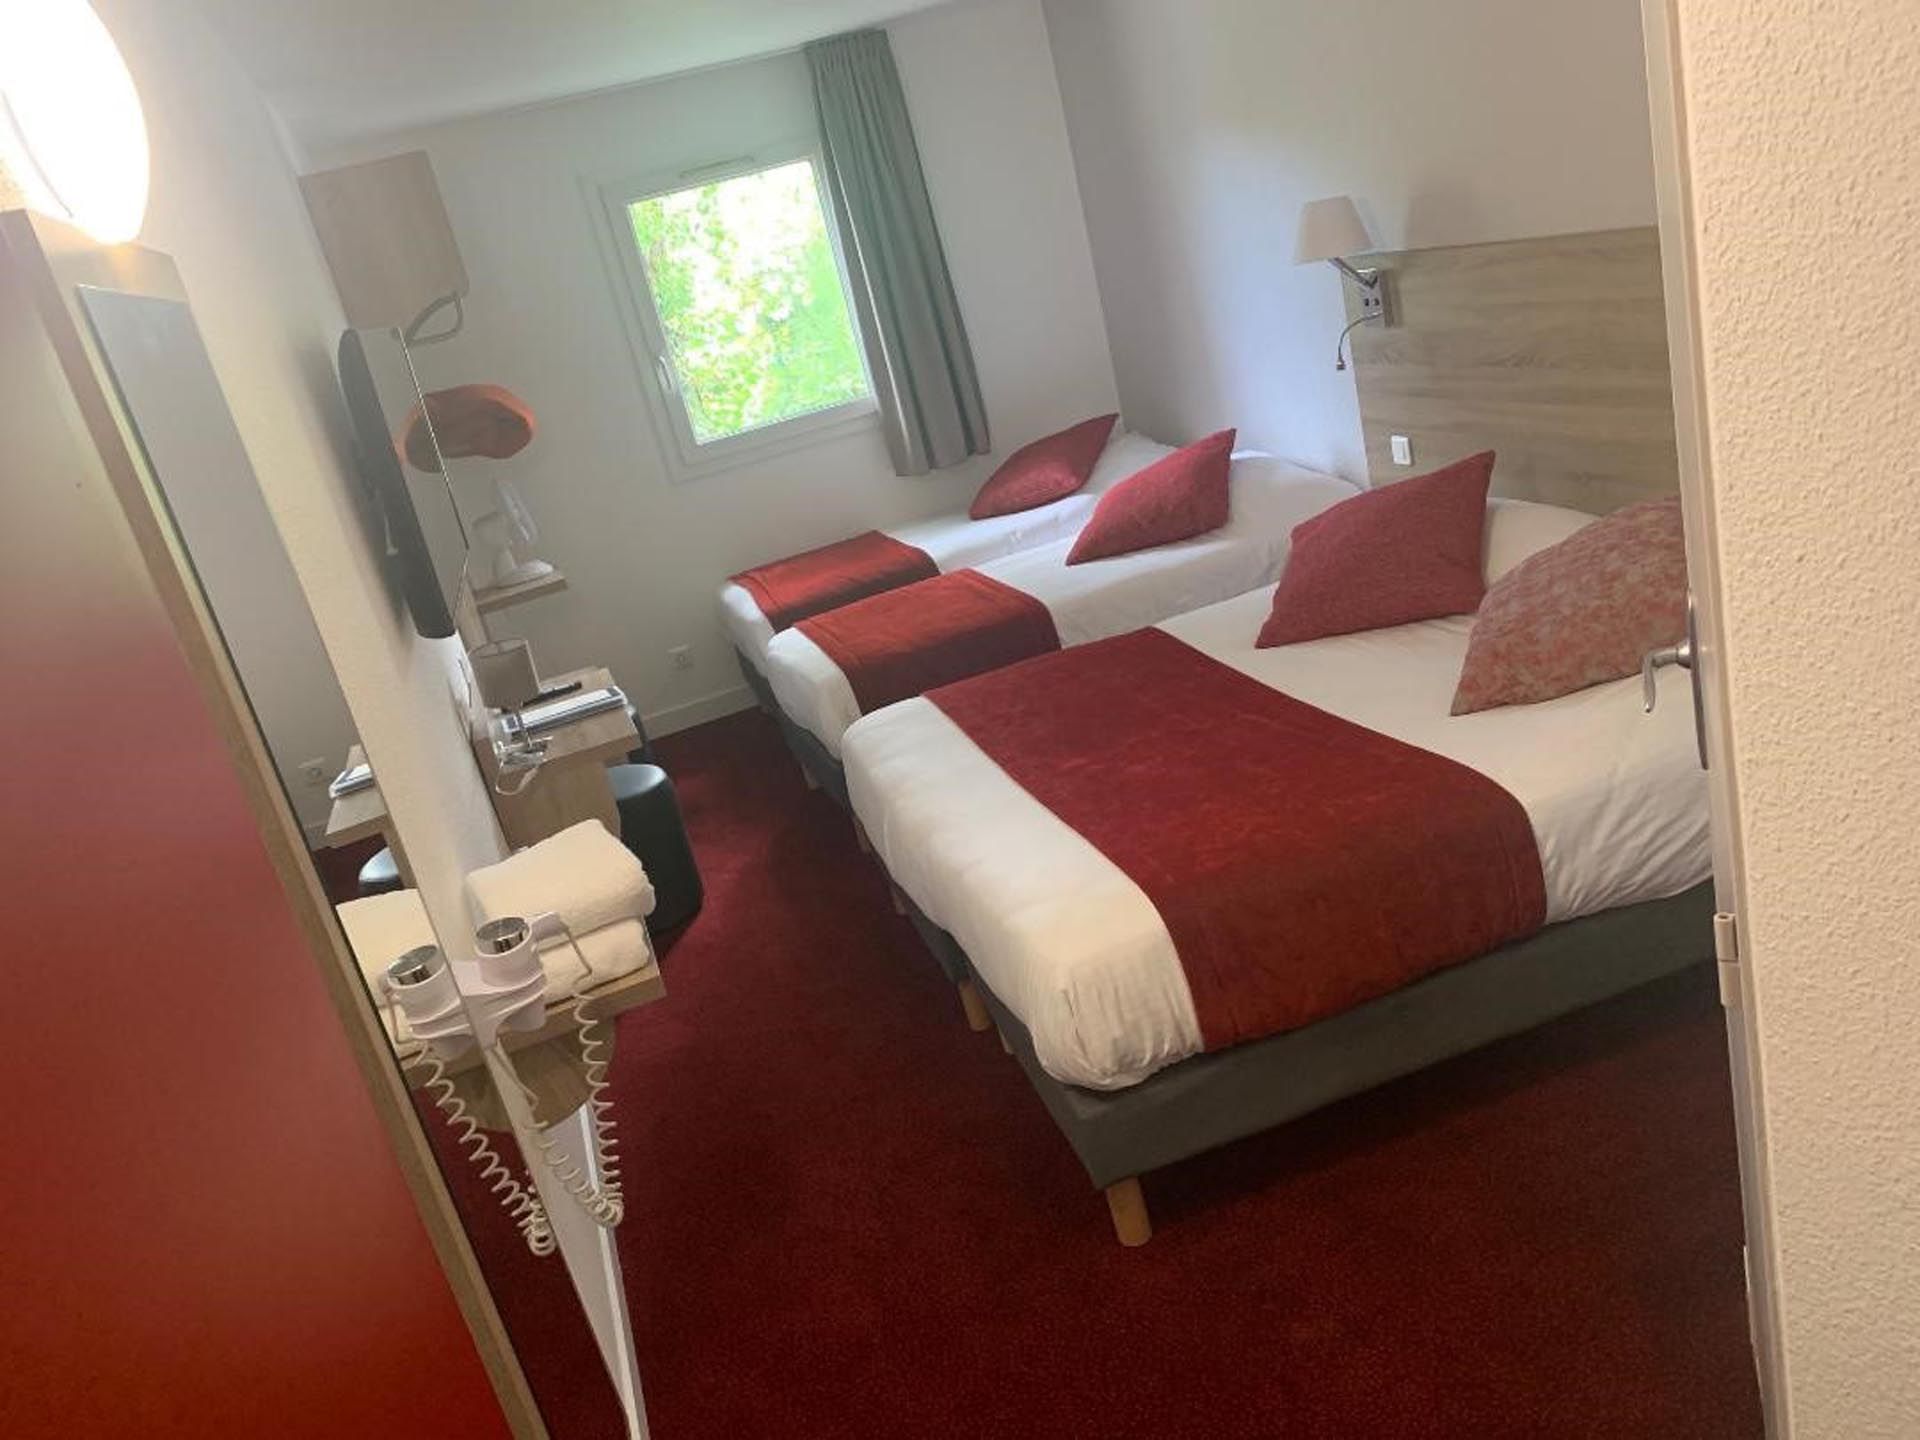 A room with twin beds and a double bed at hotel Costieres